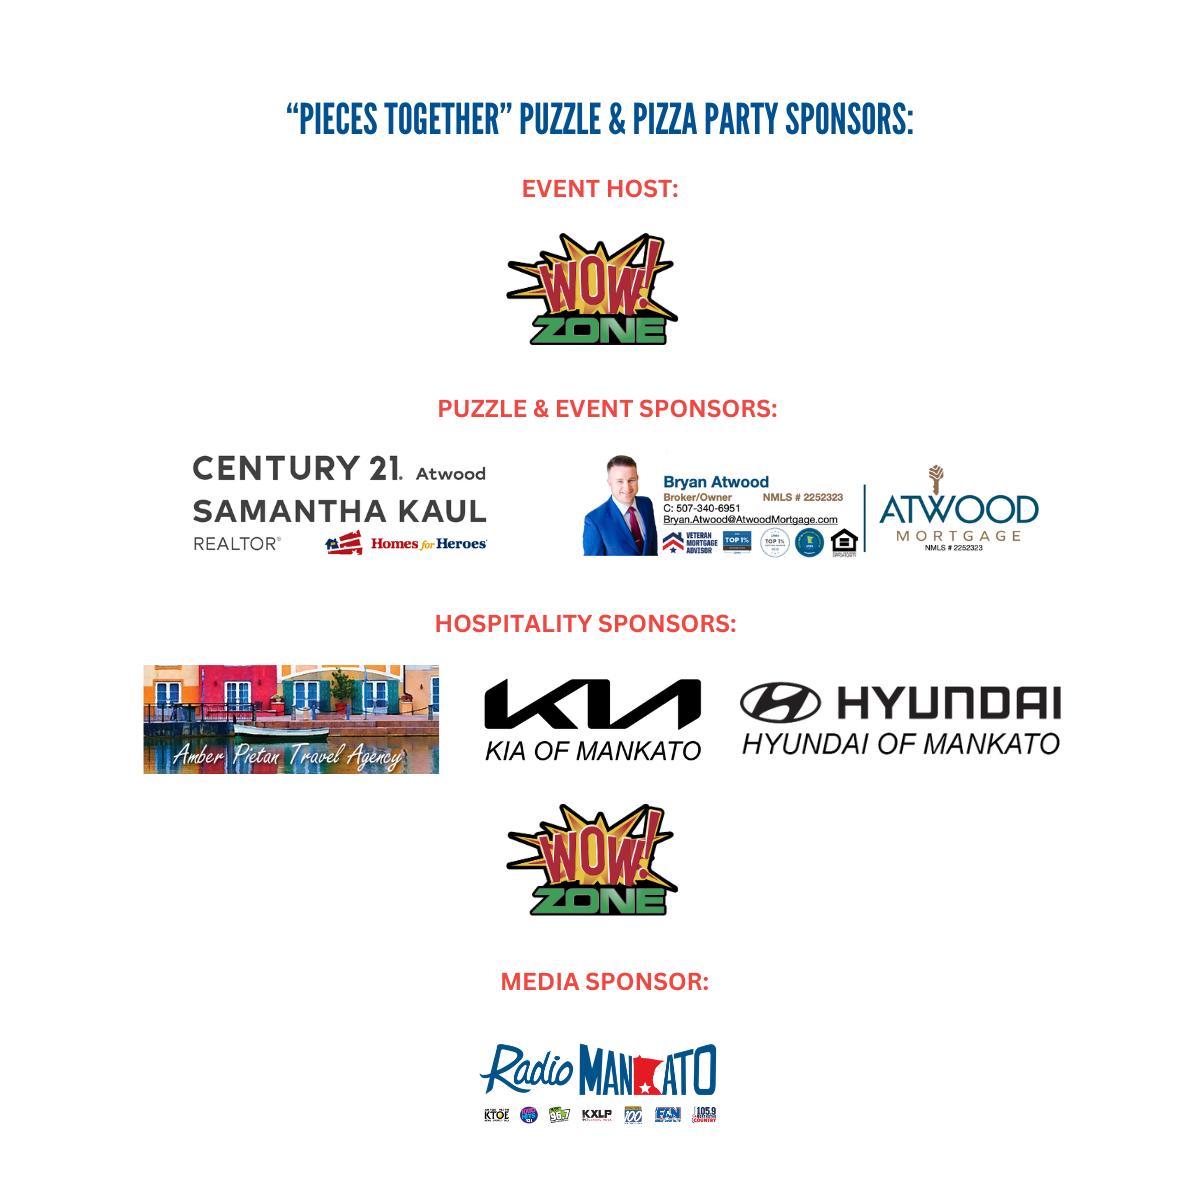 List of sponsors for the puzzle event